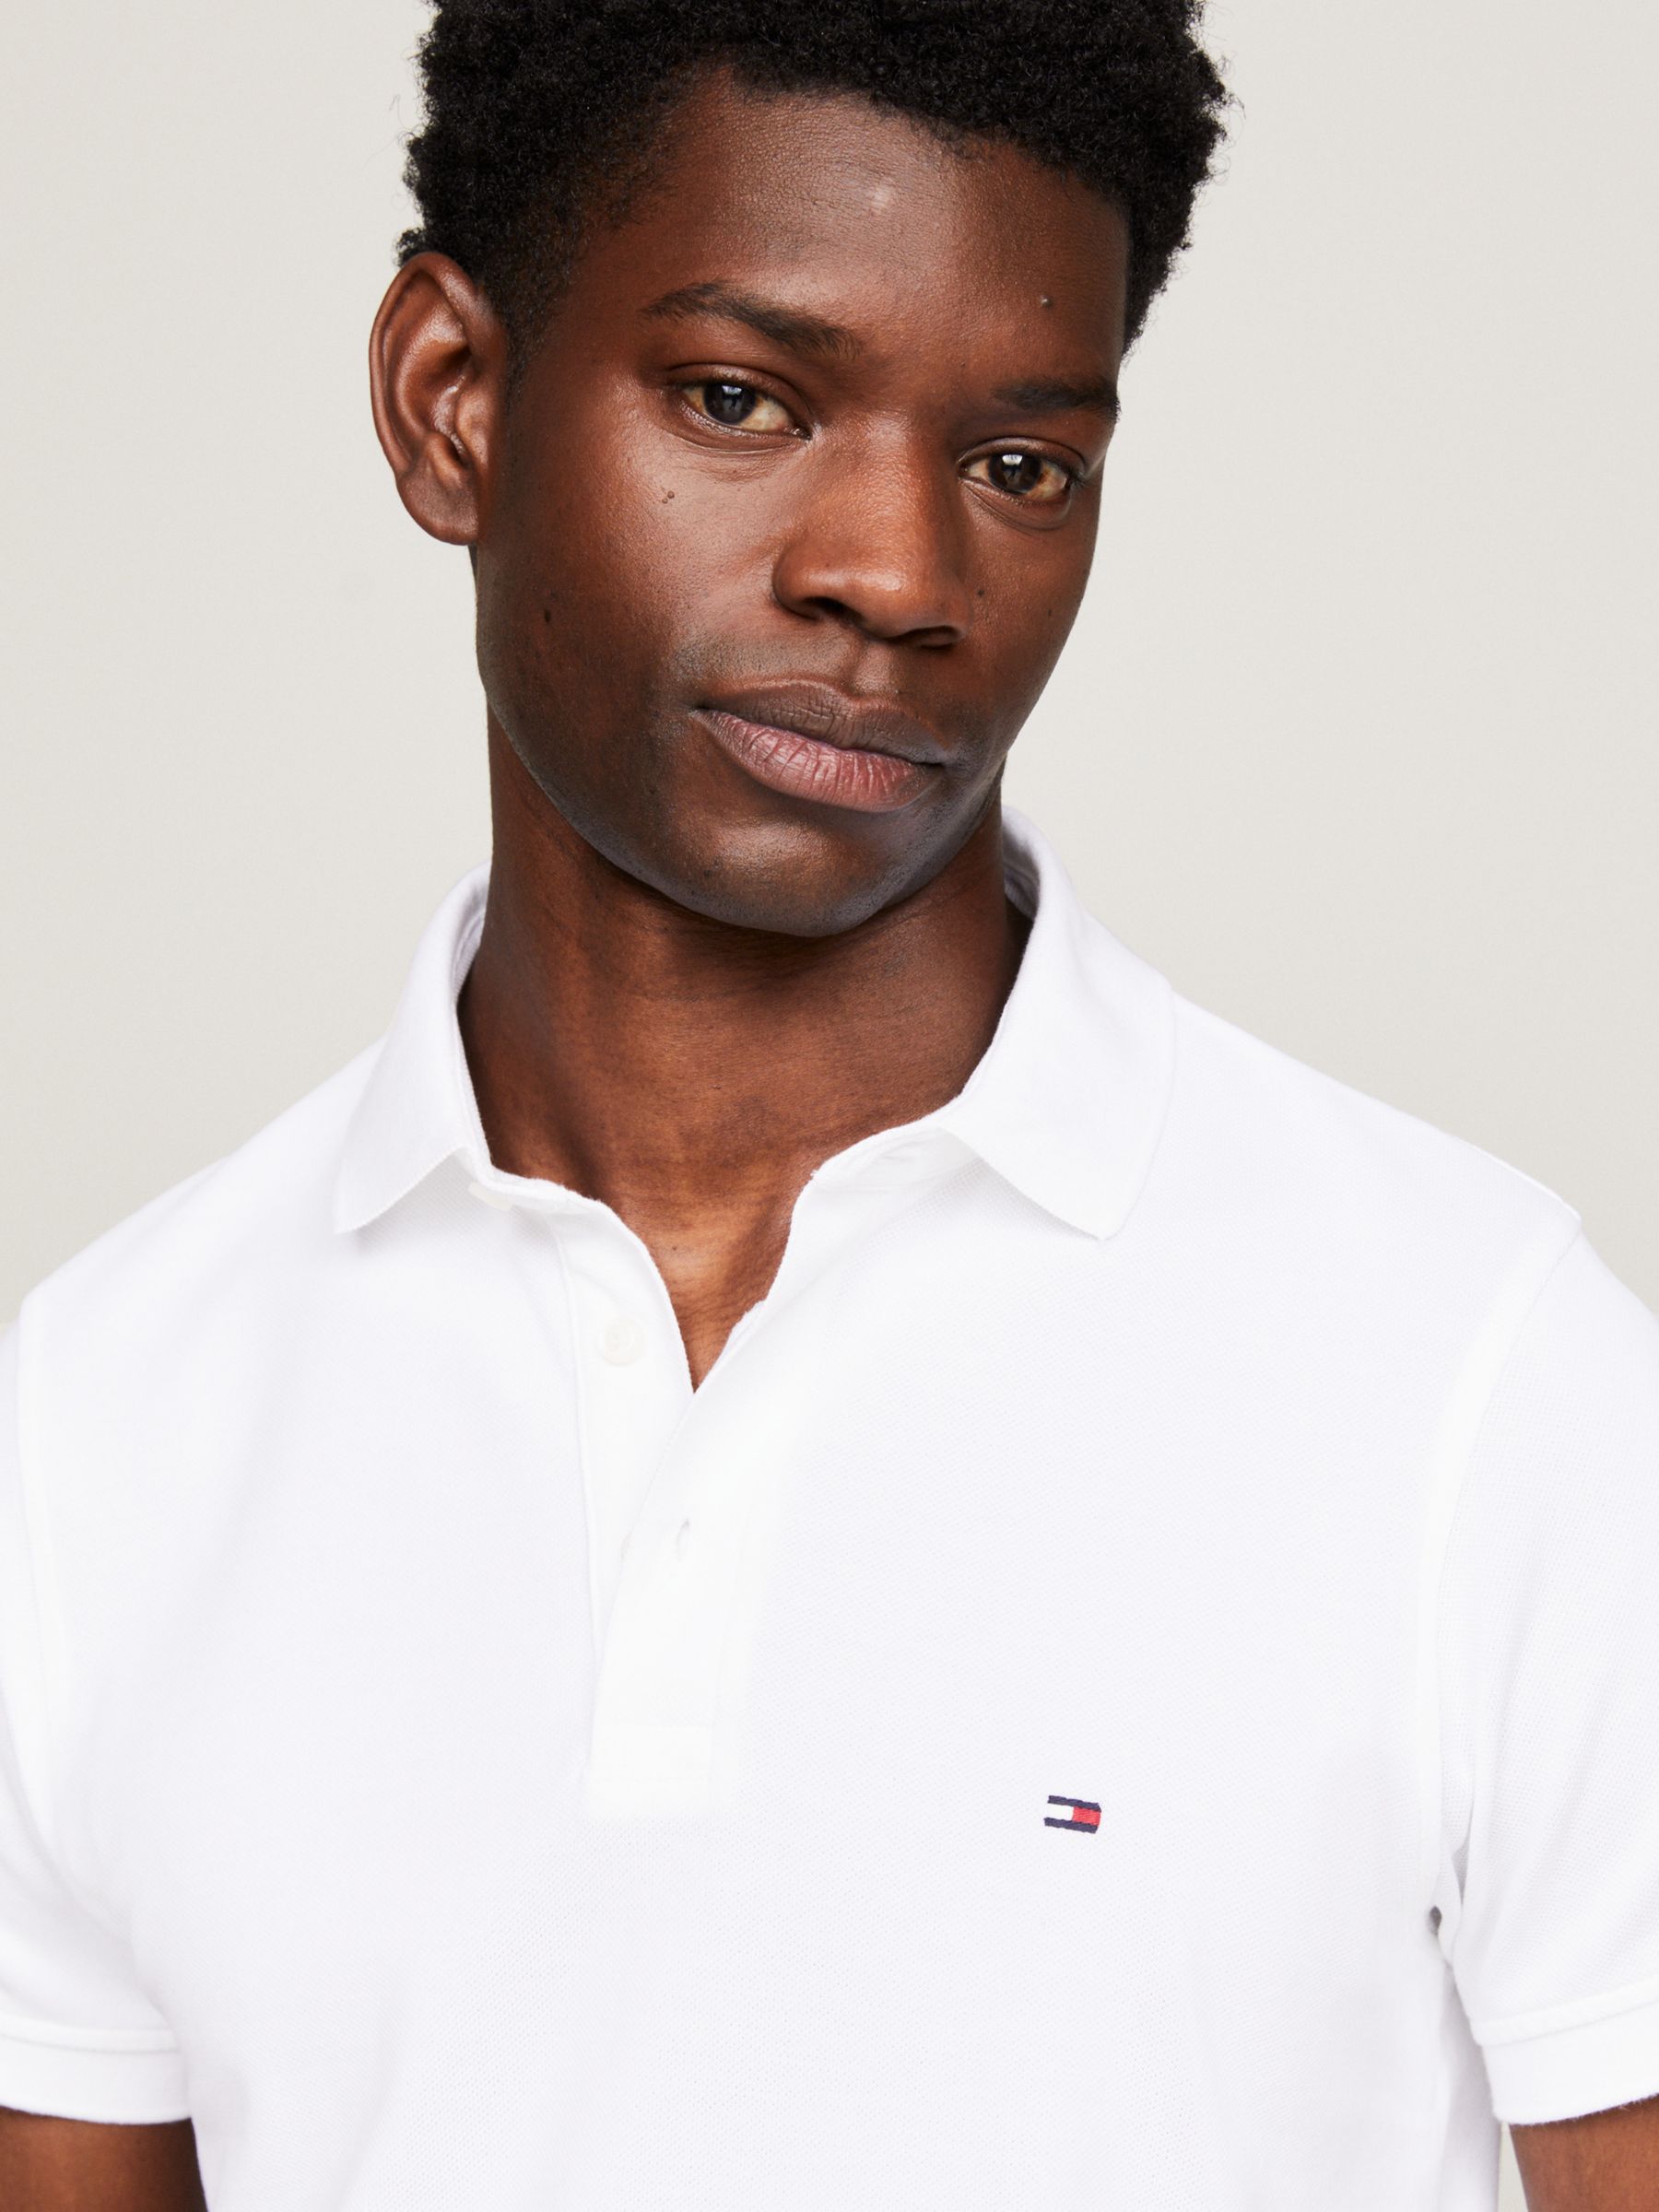 Tommy Hilfiger 1985 Slim Fit Polo Shirt, White at John Lewis